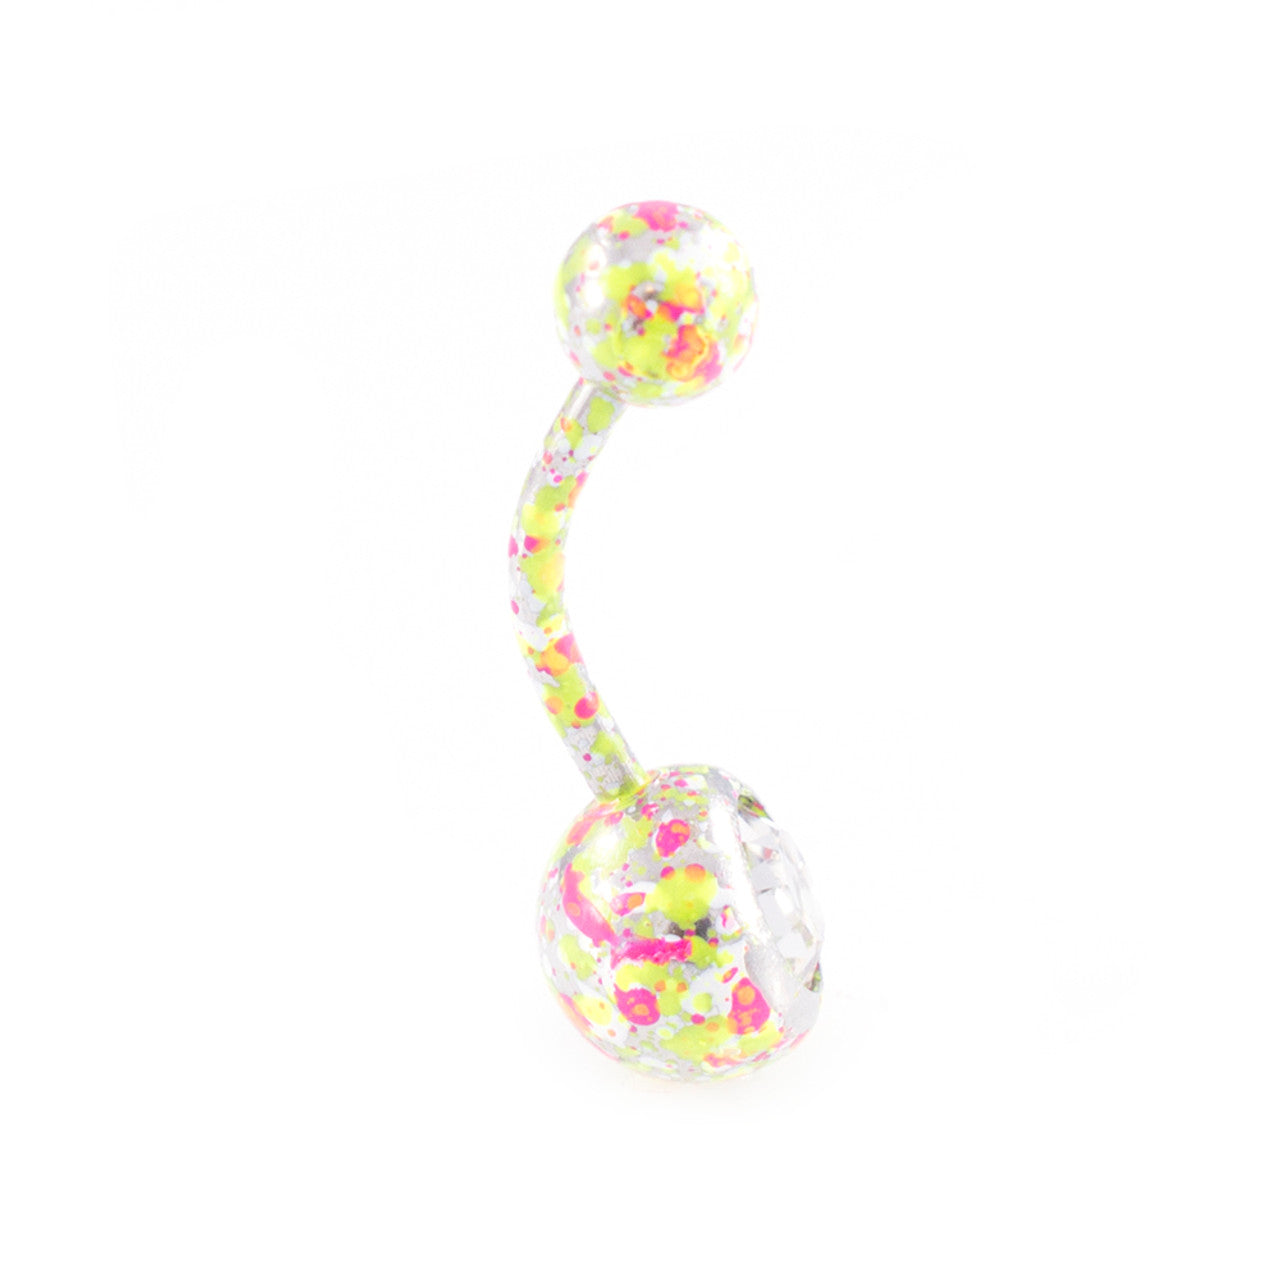 Surgical Steel Belly Button Ring 14 Gauge With Paint Splatter - 2 Pack